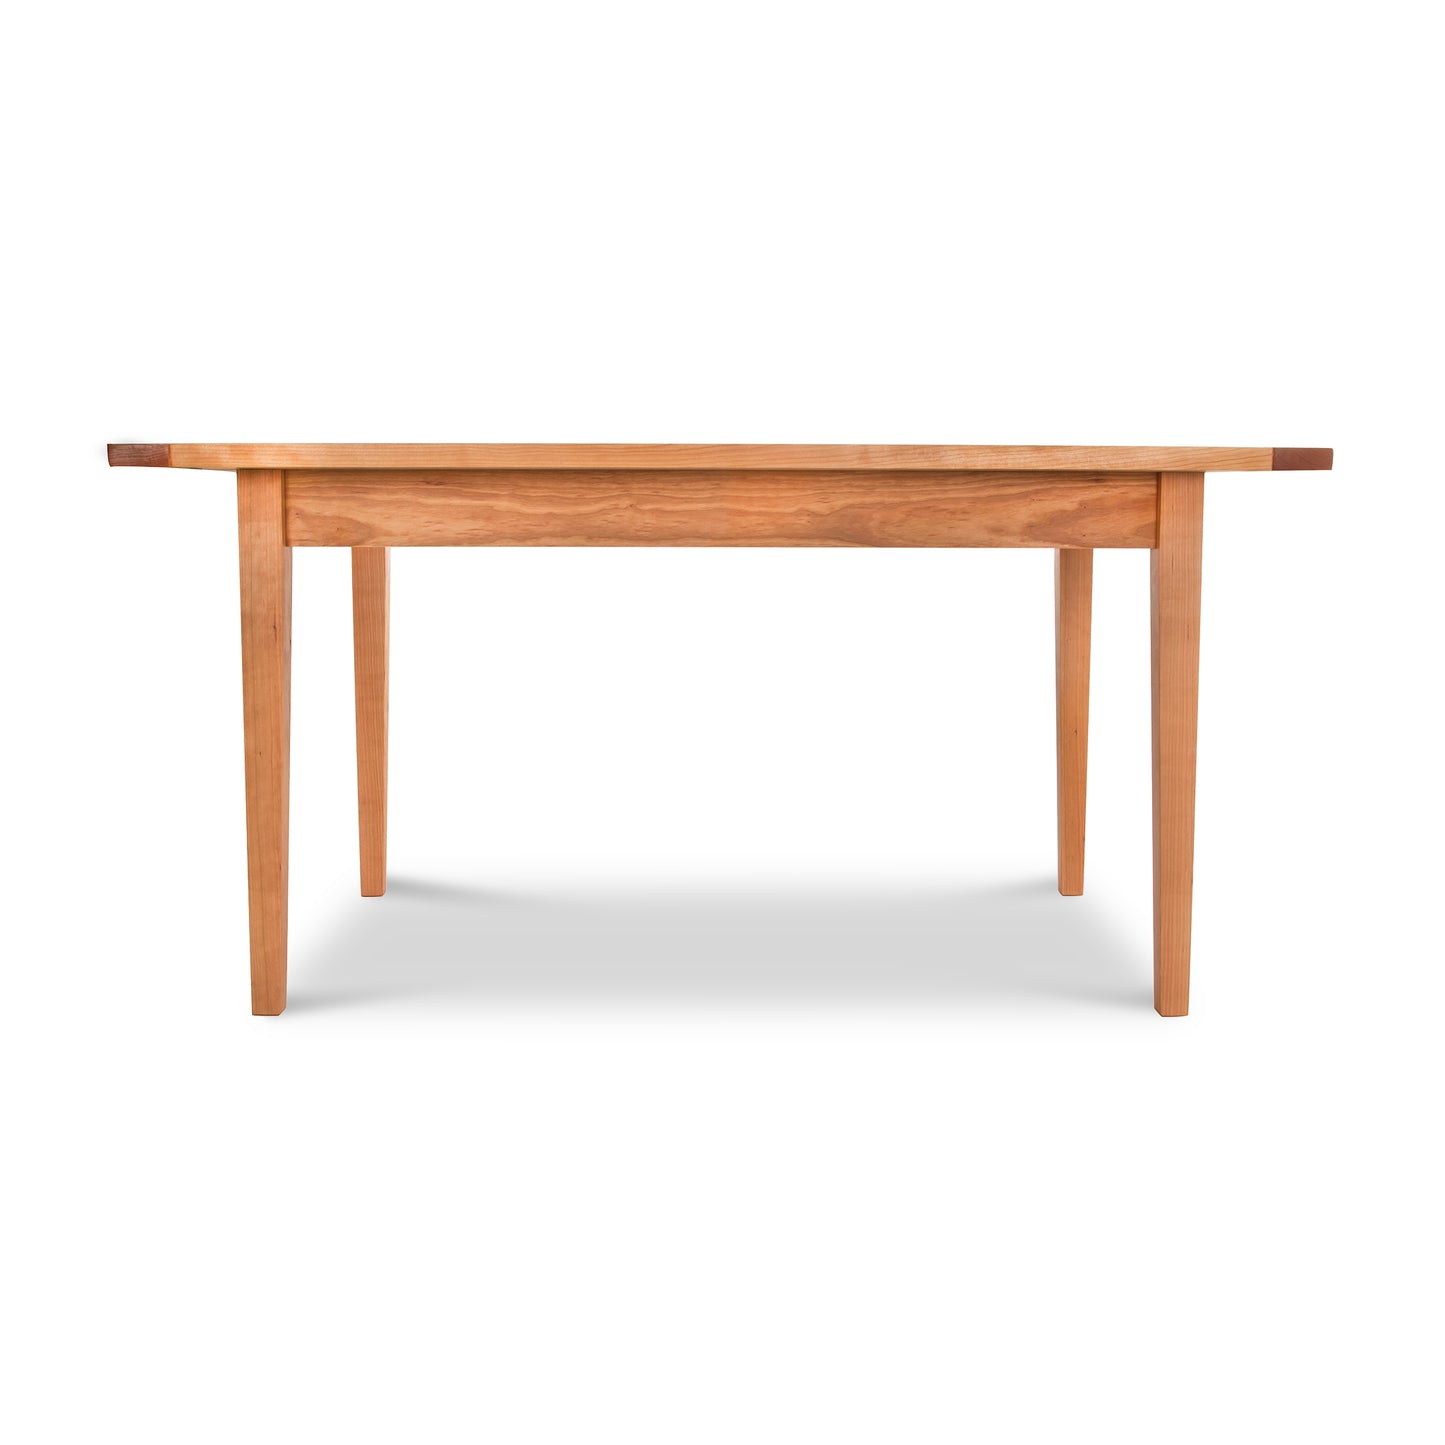 A Maple Corner Woodworks Vermont Shaker Harvest Extension Dining Table, crafted from sustainably harvested woods, with four legs, displayed against a white background.